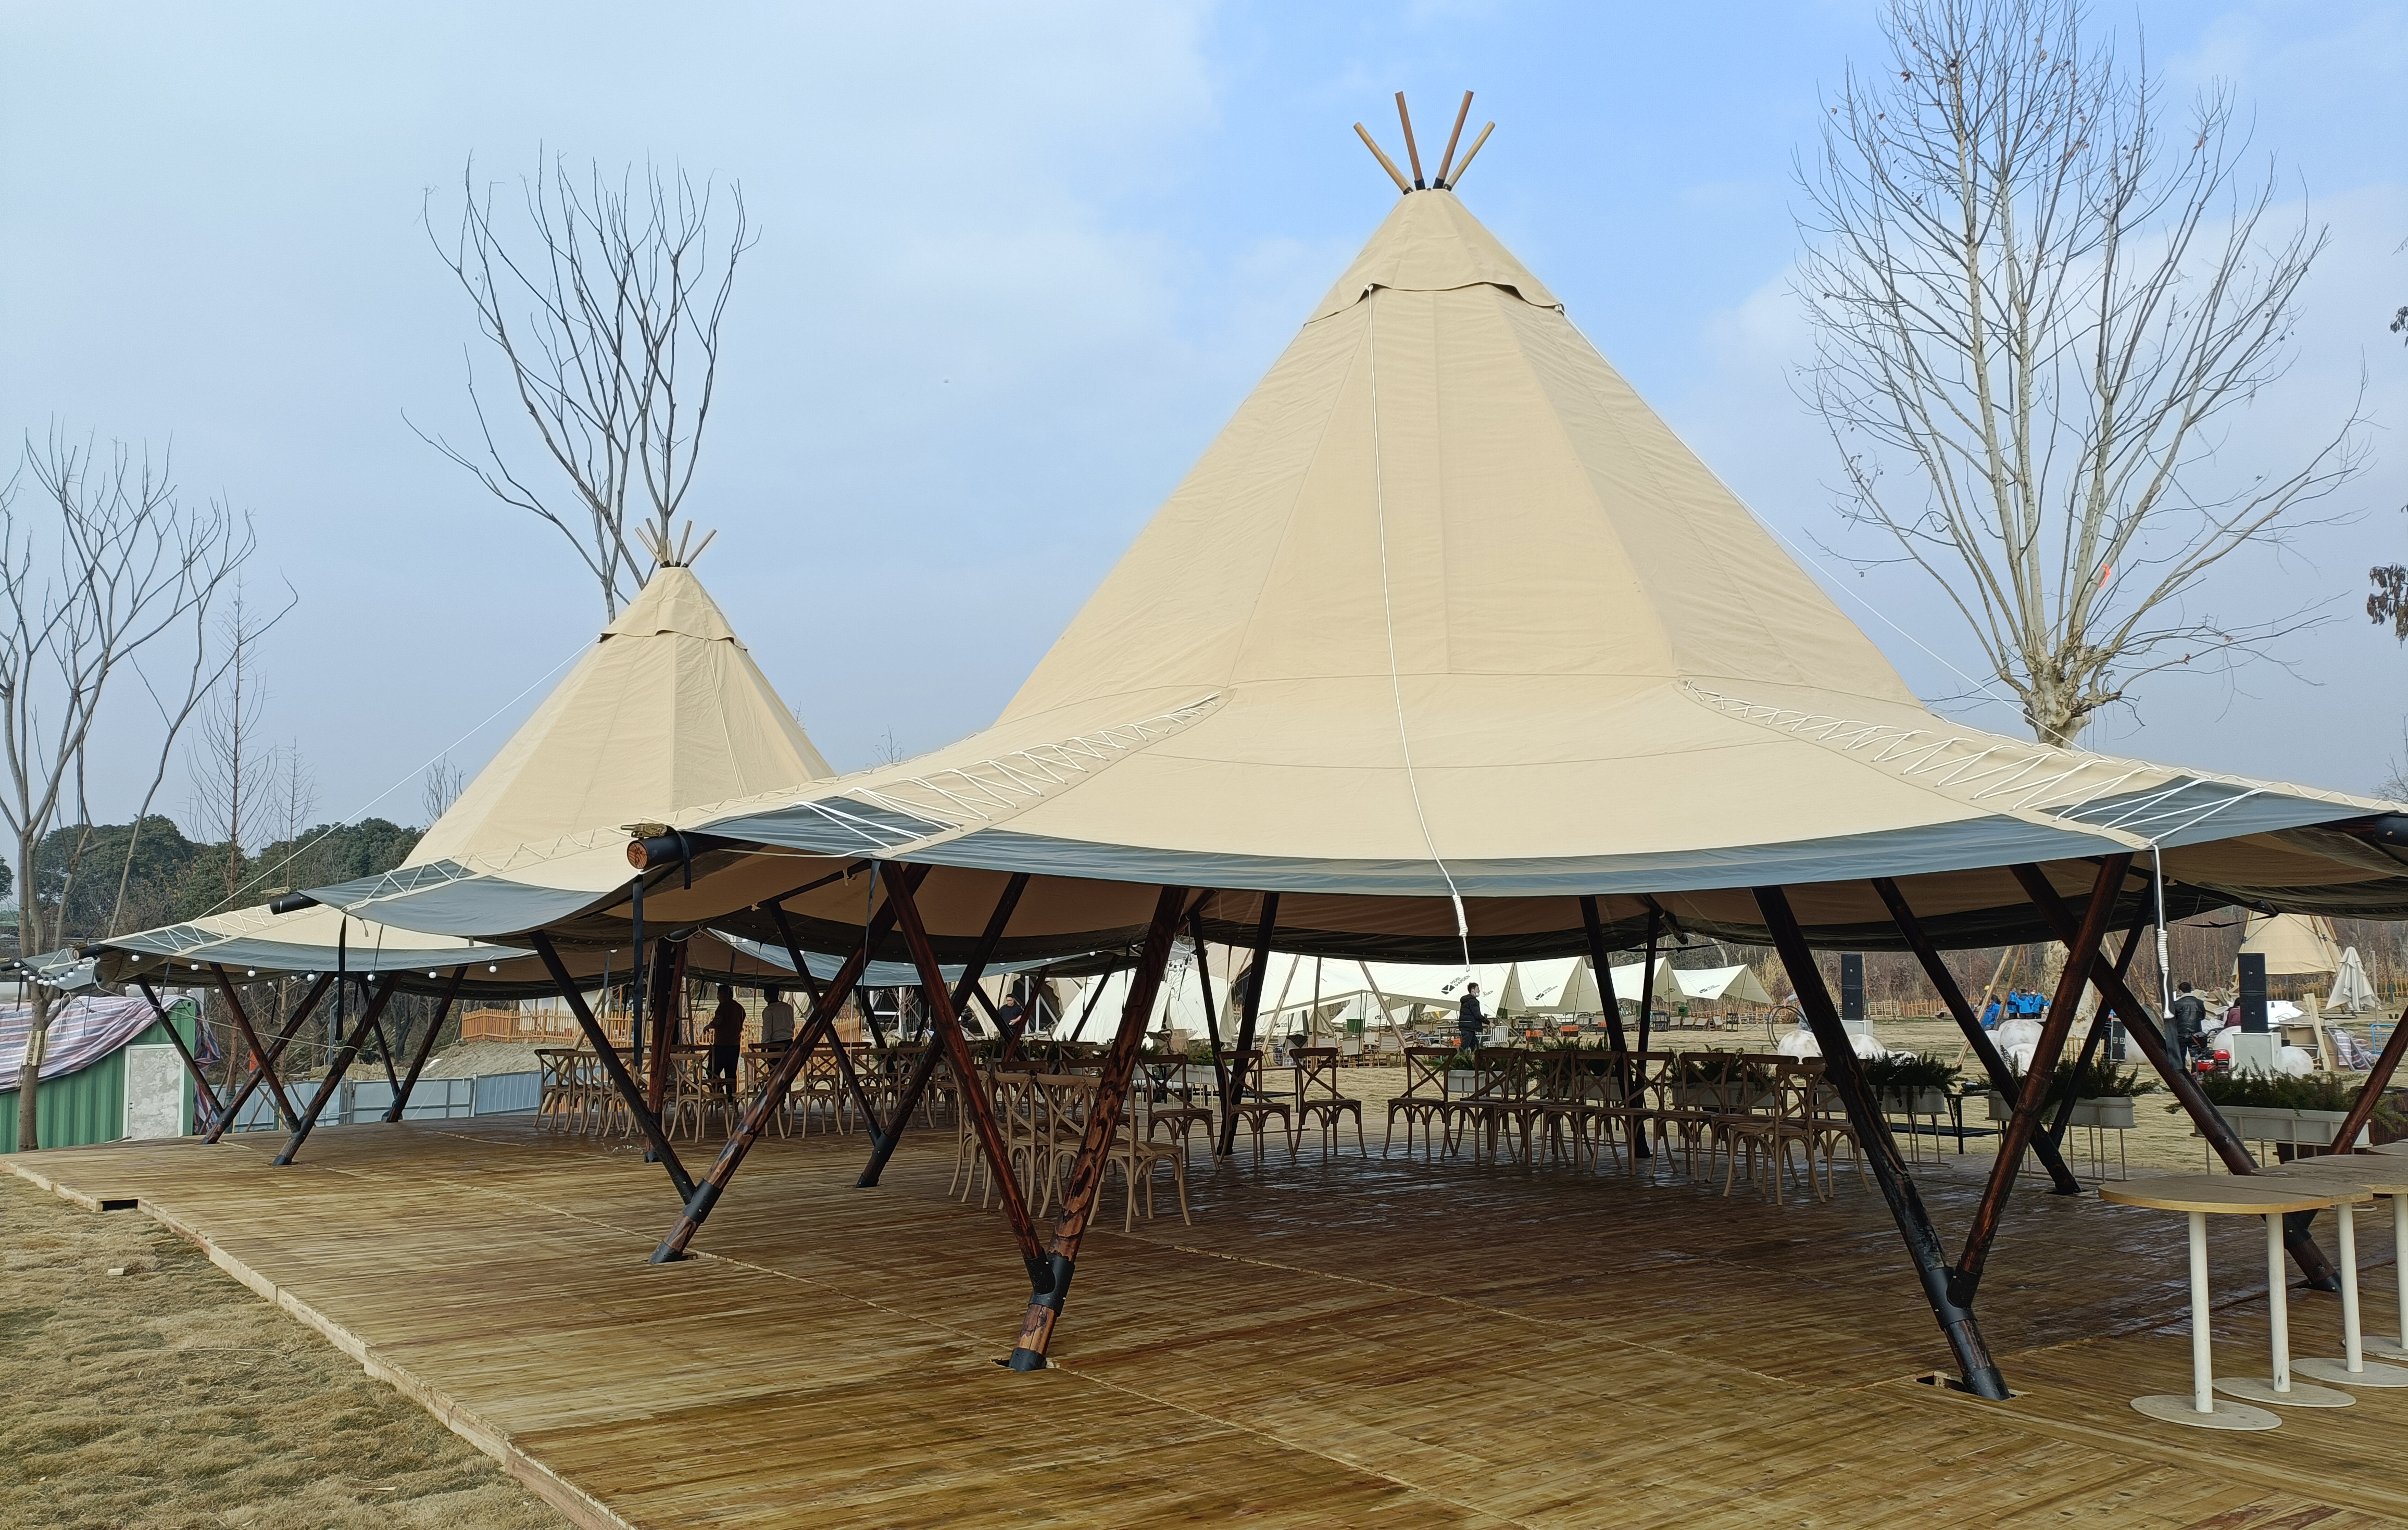 Large Tipi Canopy Tent For Urban Camping